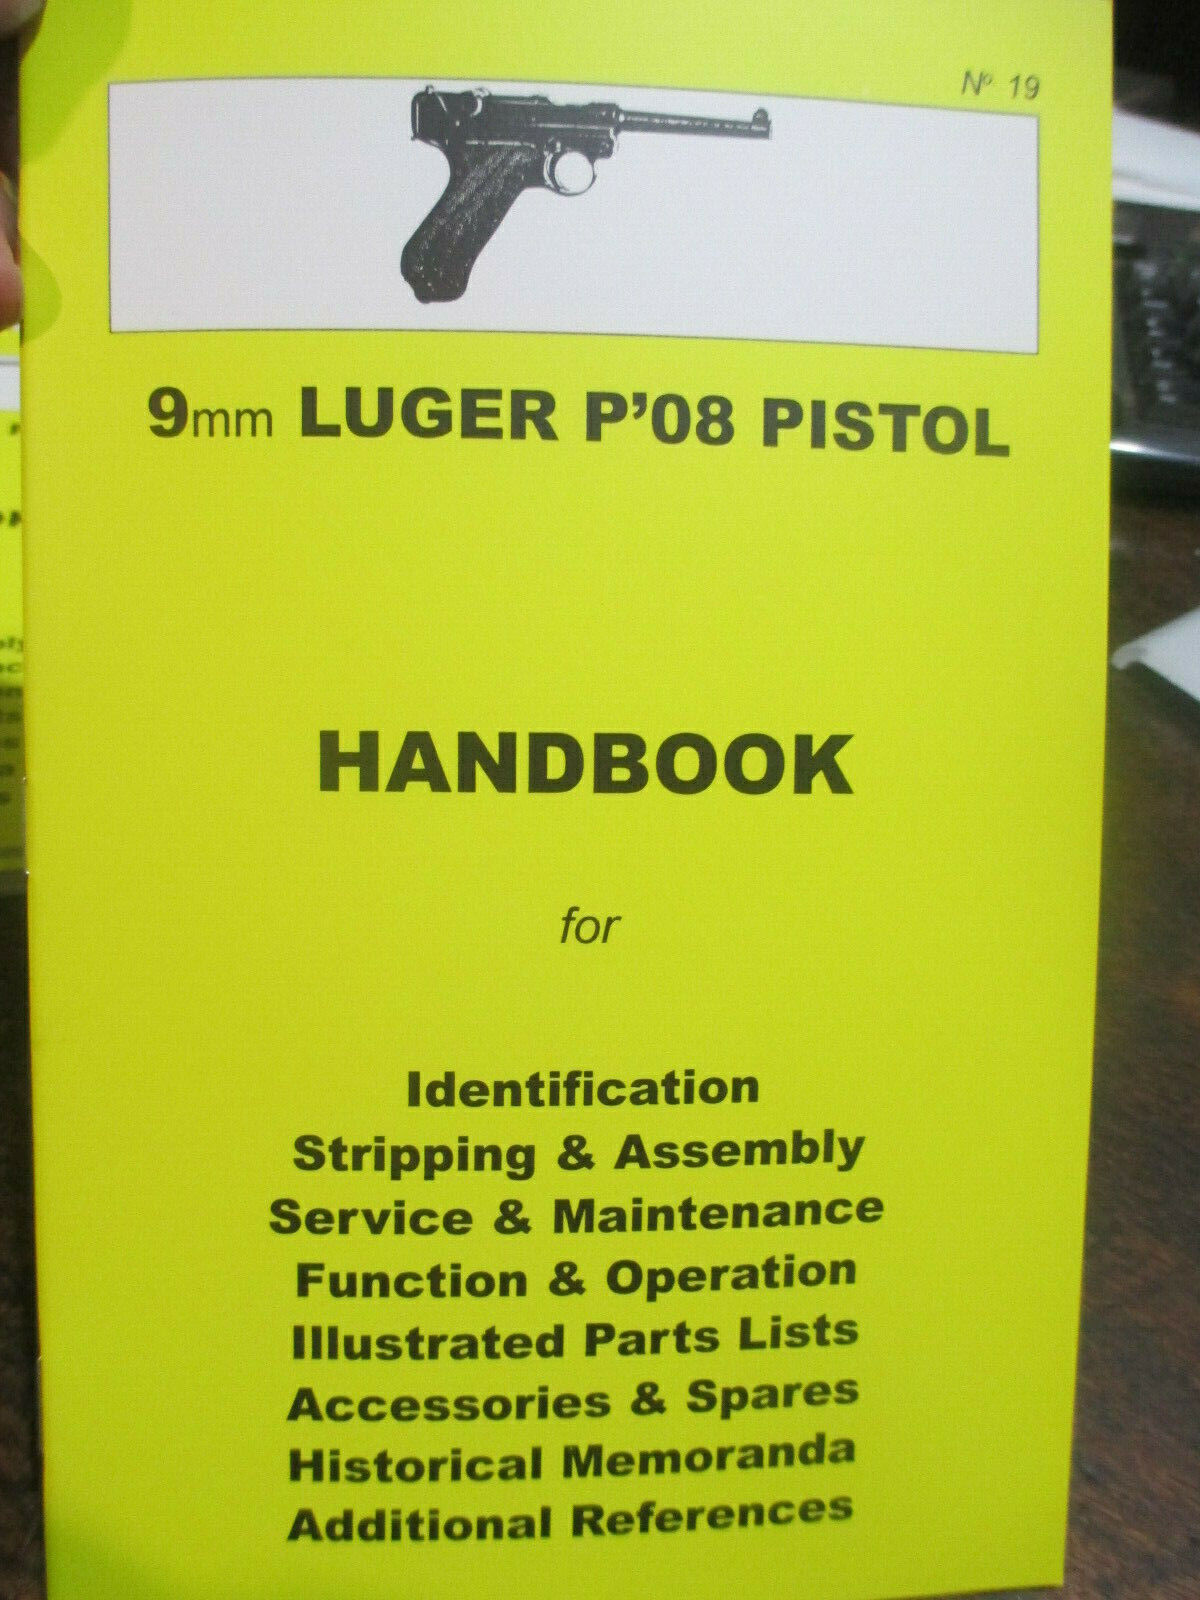 9mm LUGER P'08 PISTOL HAND BOOK Maintenance Compact In Field Reference Book 19